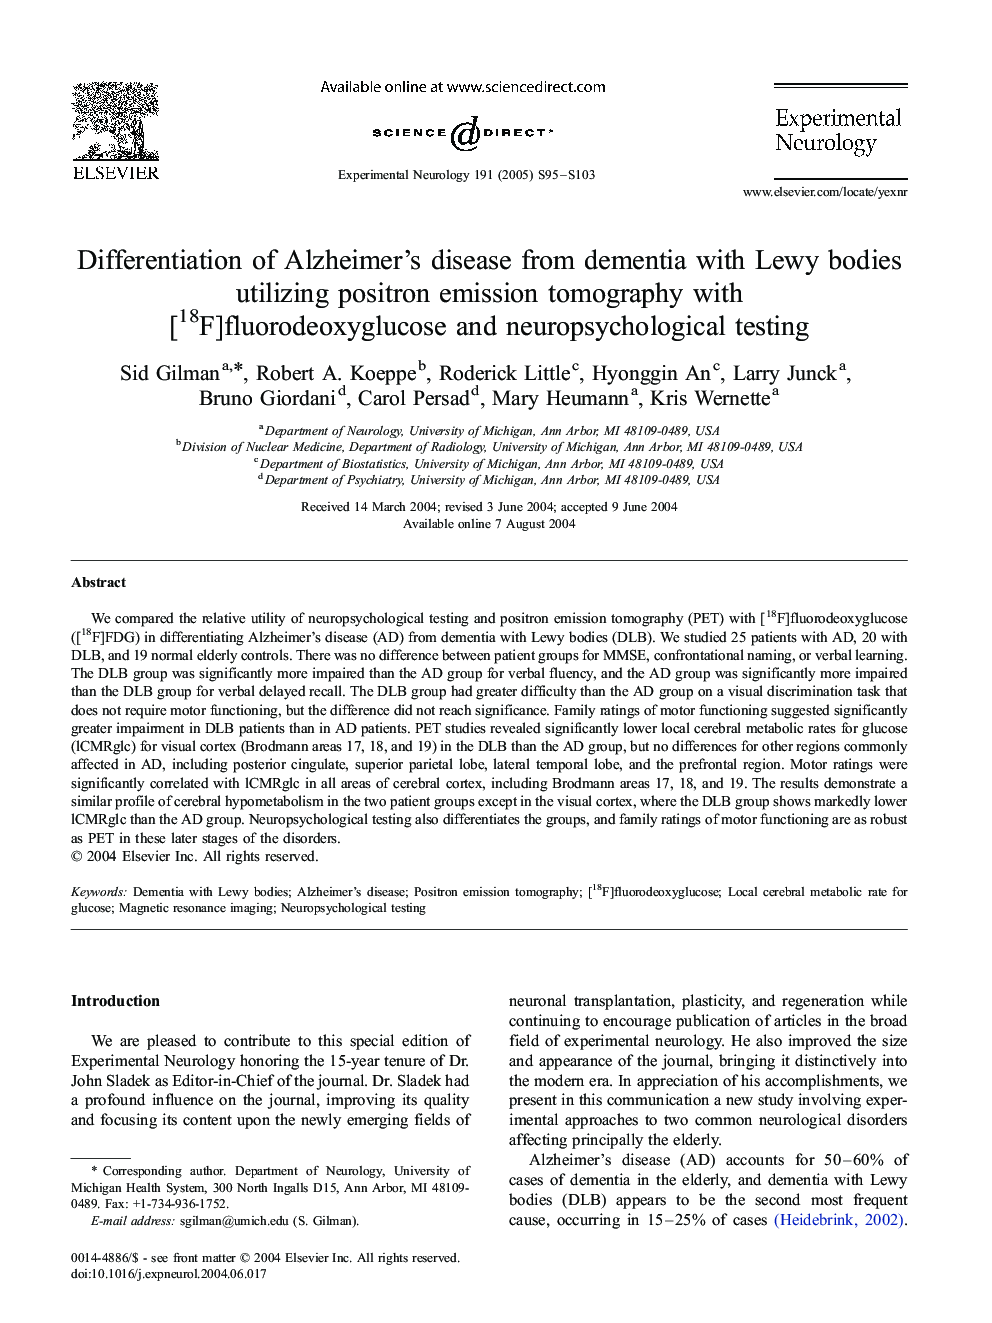 Differentiation of Alzheimer's disease from dementia with Lewy bodies utilizing positron emission tomography with [18F]fluorodeoxyglucose and neuropsychological testing